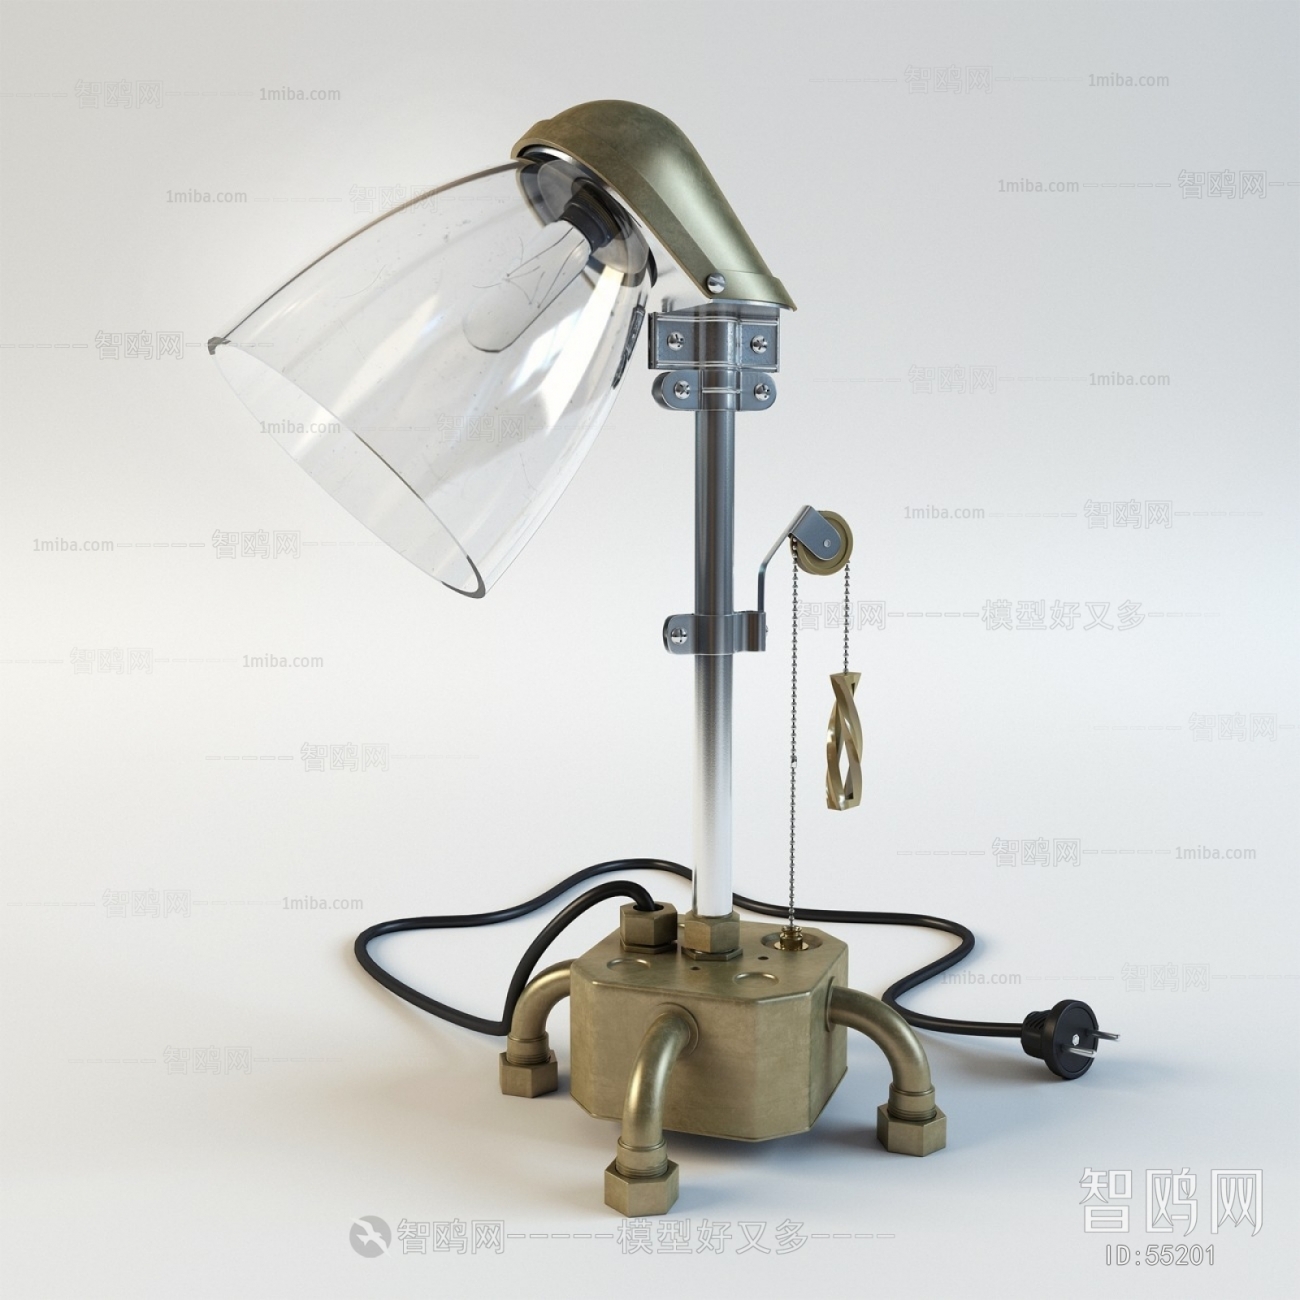 Modern Industrial Style Table Lamp